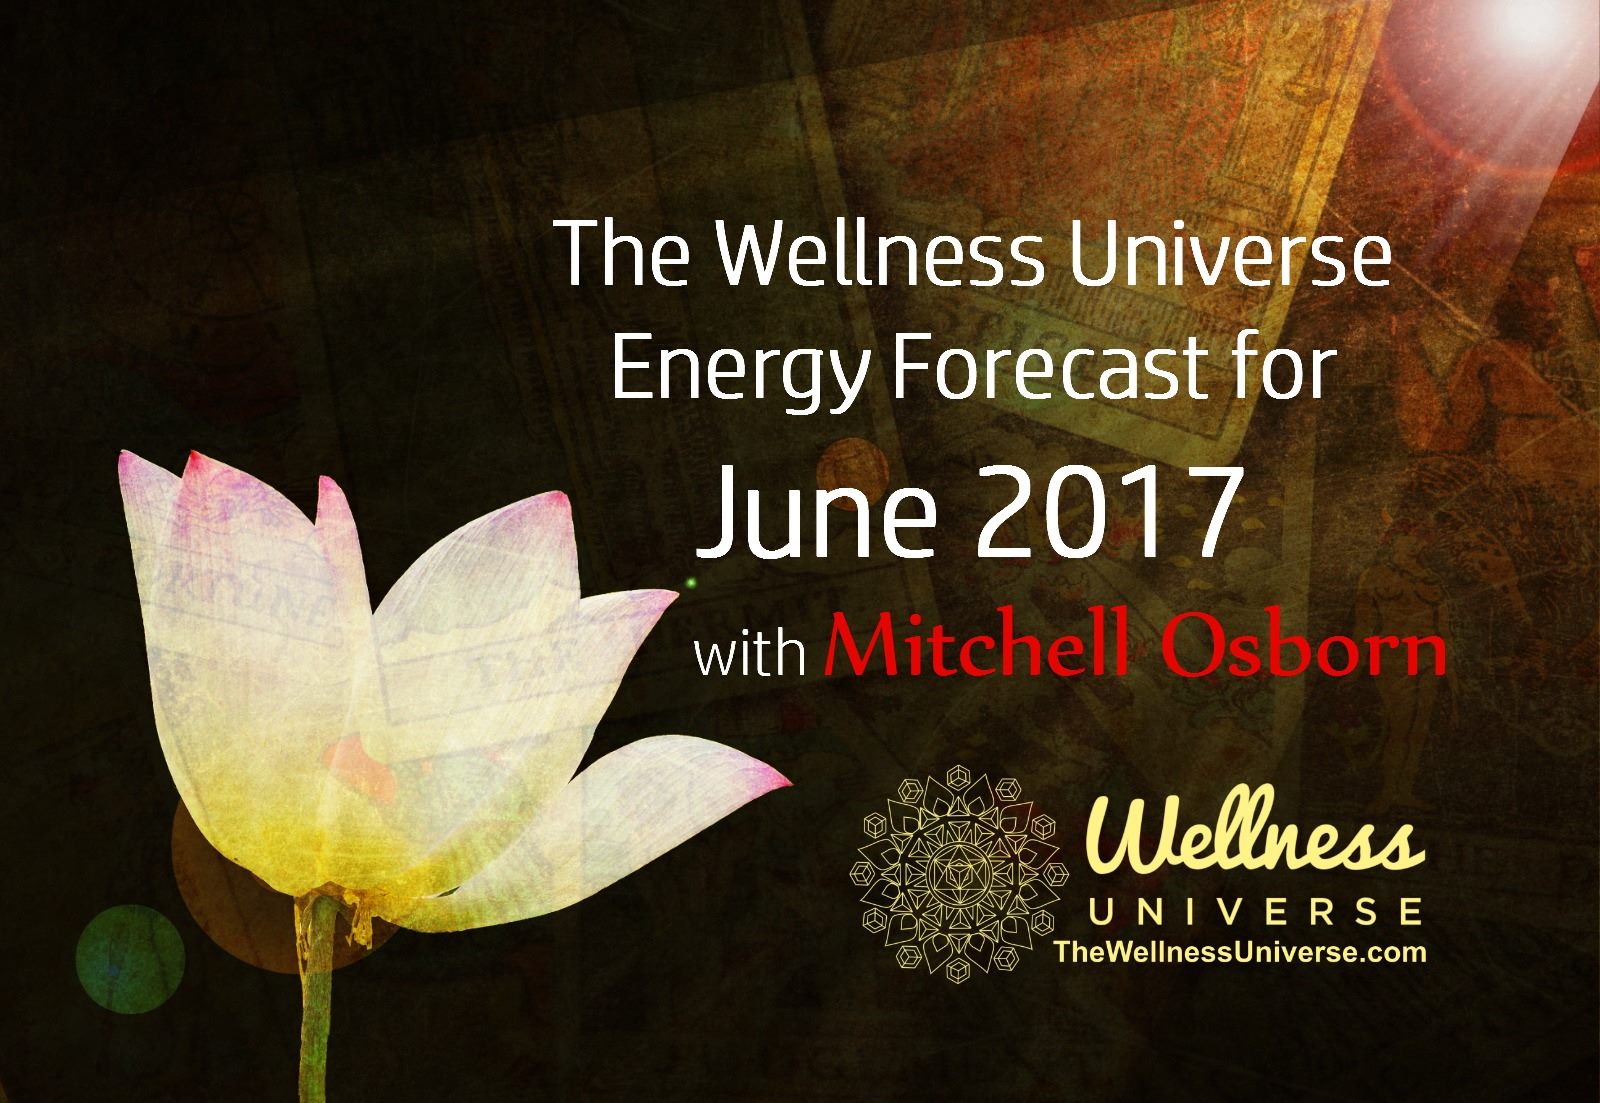 Energy Forecast for June with Mitchell Osborn #TheWellnessUniverse #WUVIP #ForecastForJune